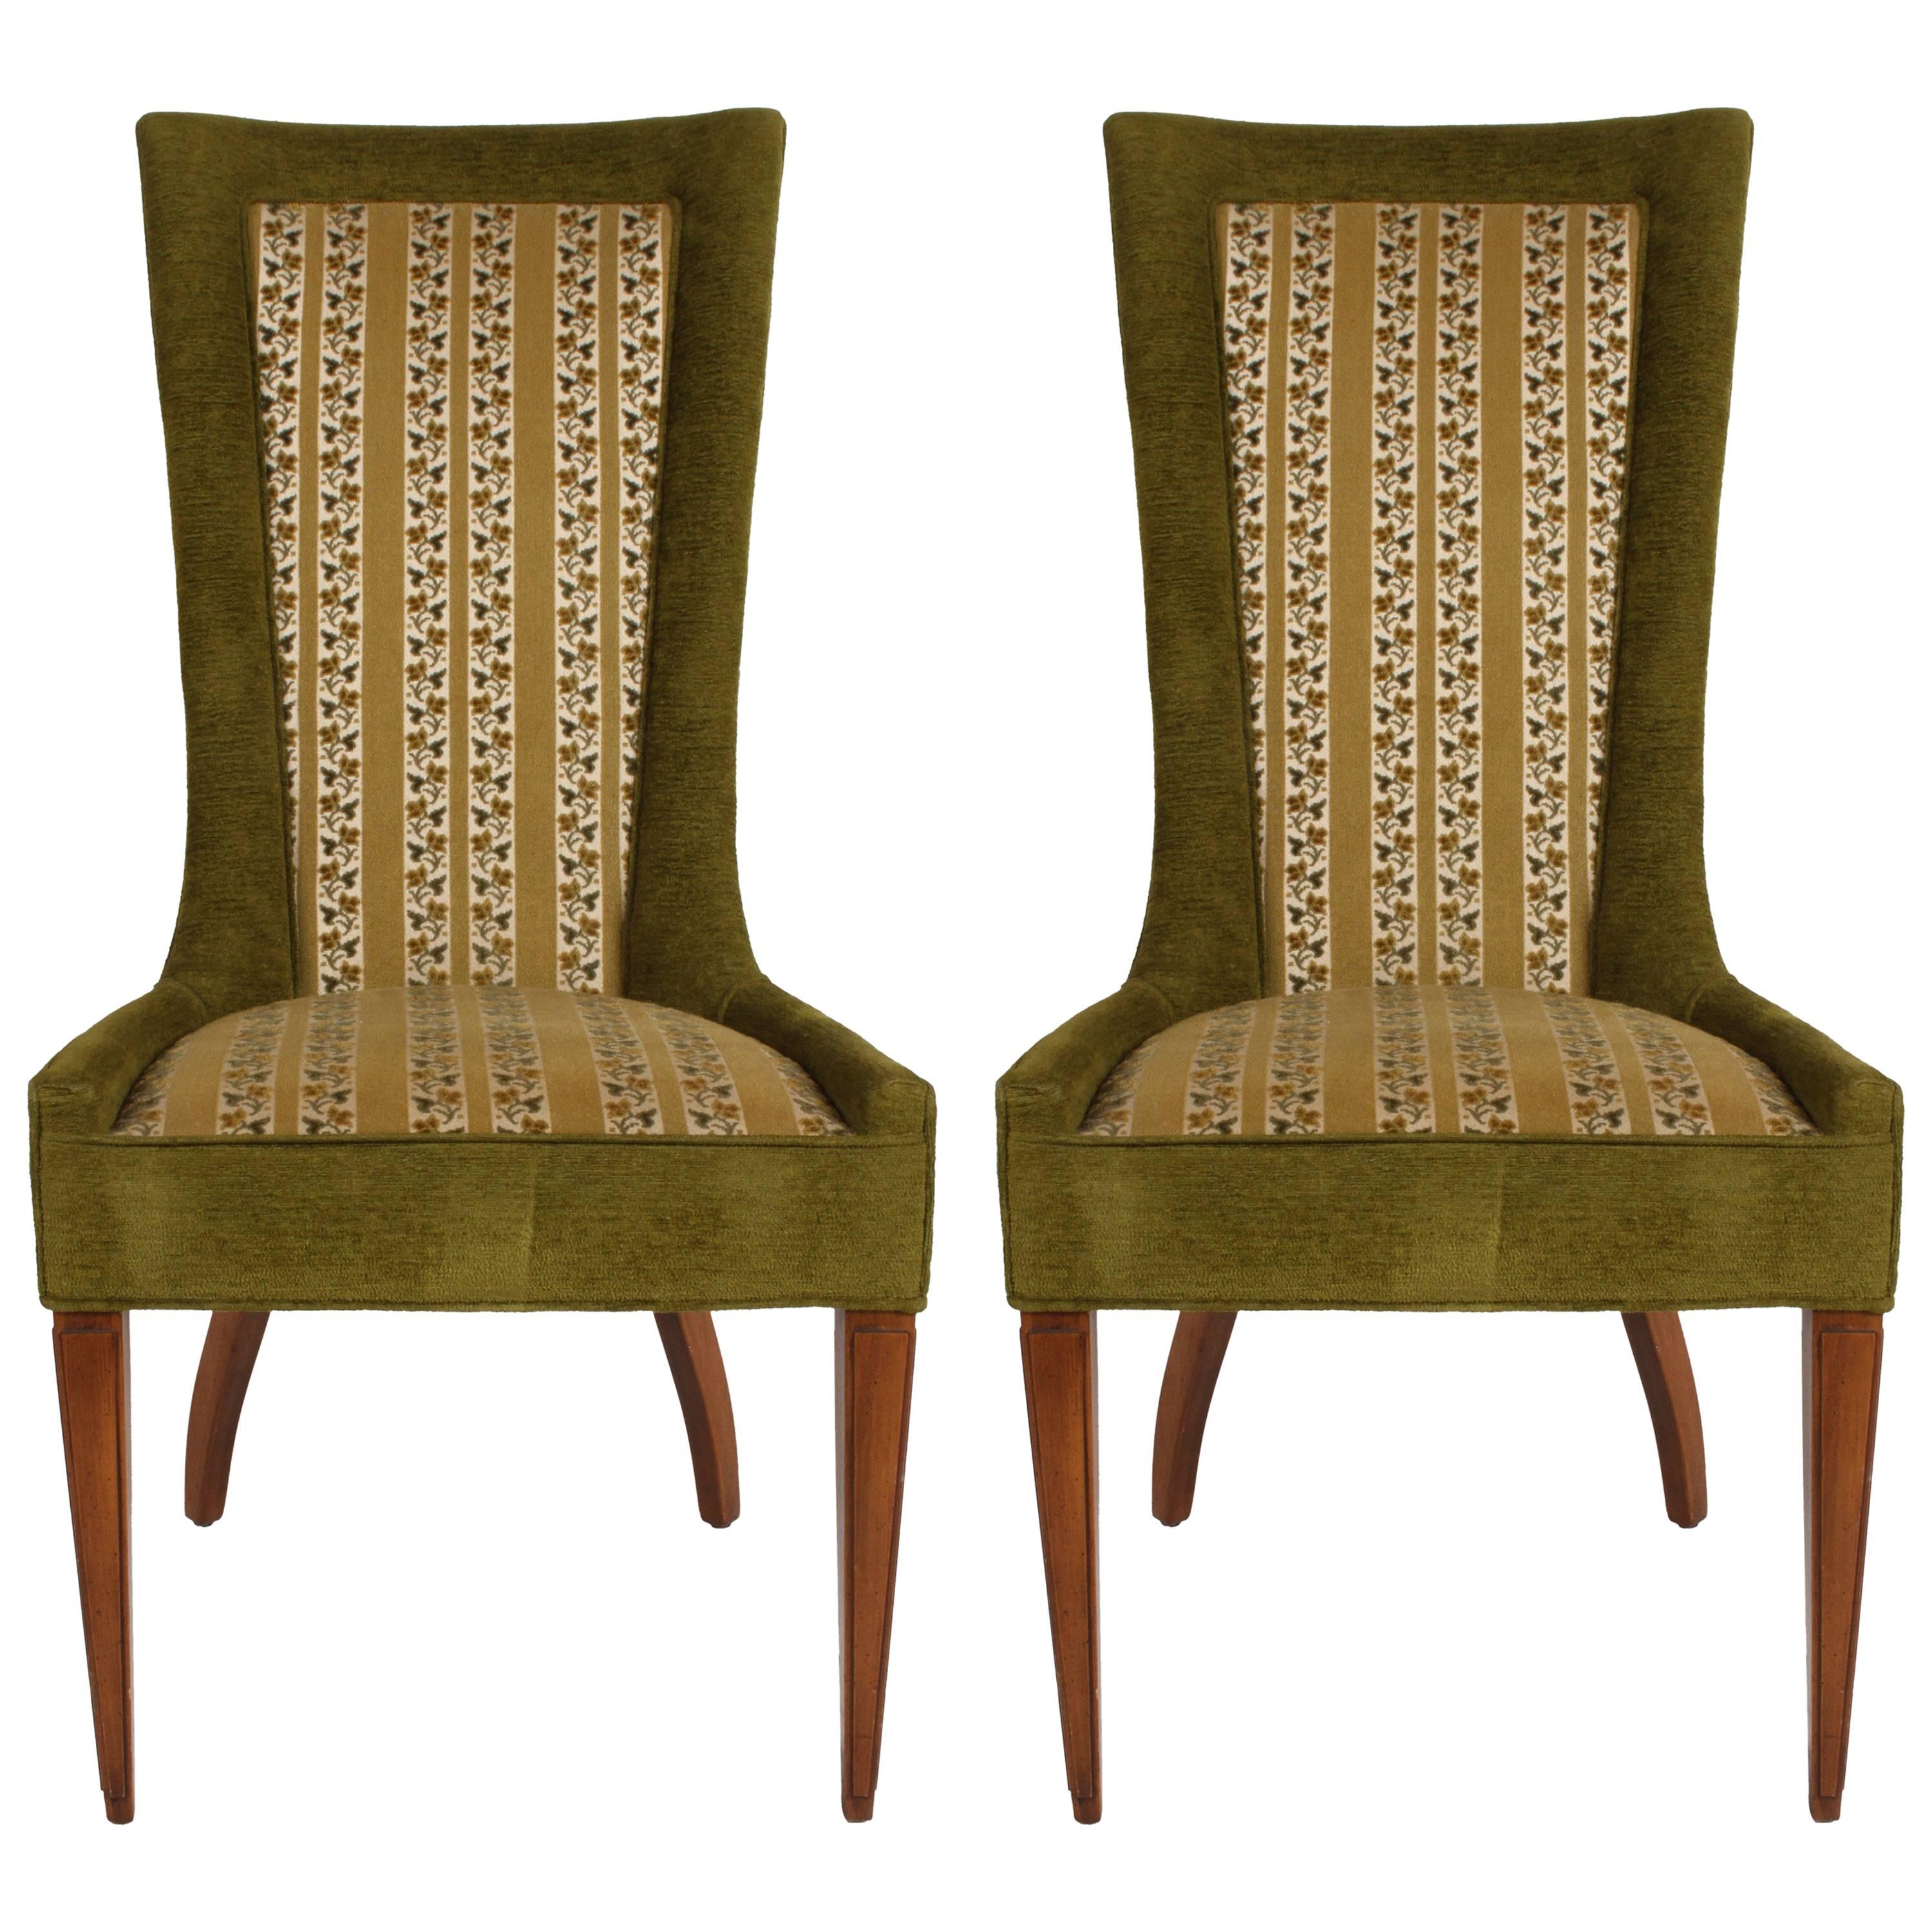 Pair of High Back Hollywood Regency MCM Dining Chairs